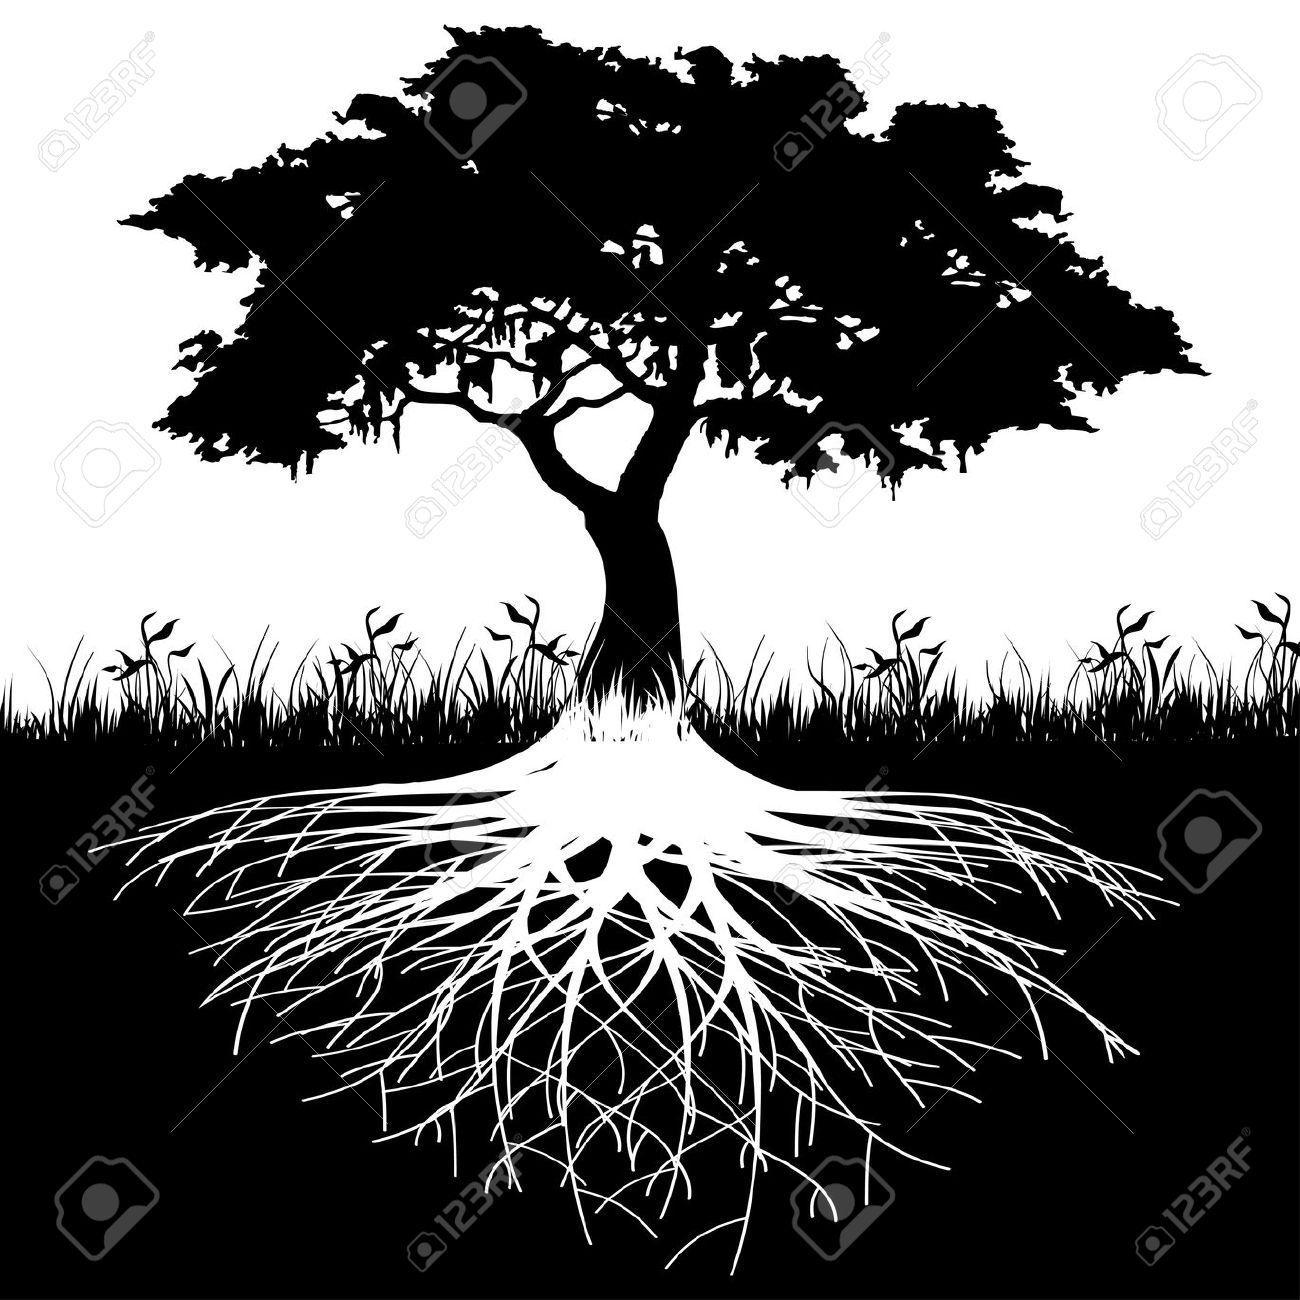 Black Tree with Roots Logo - tree of life with roots clipart. Designs for others. Tree